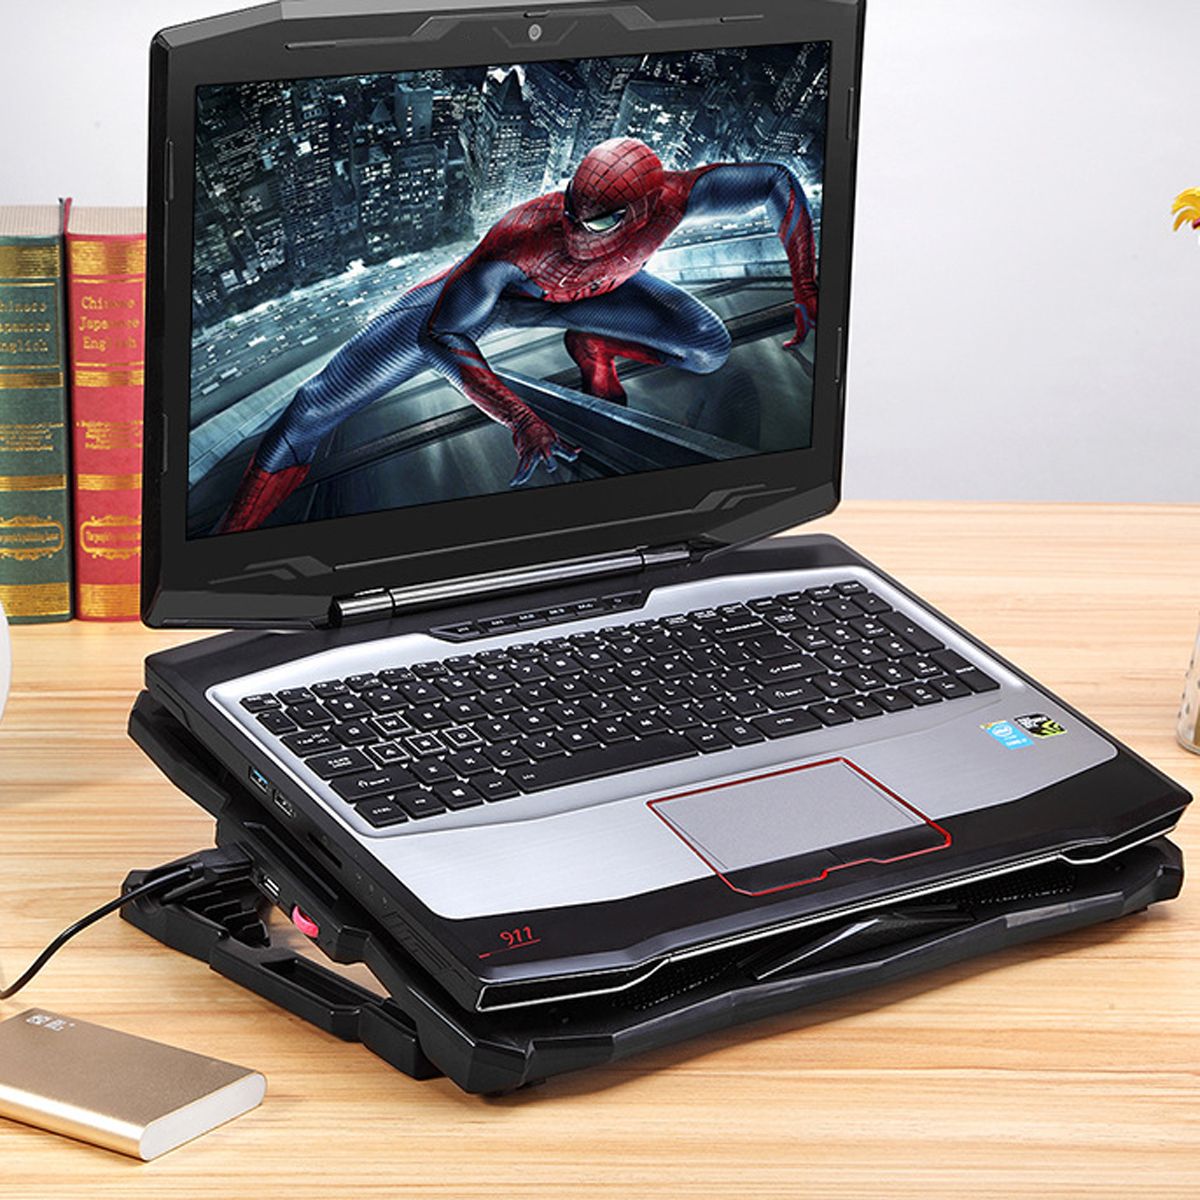 Foldable-Laptop-Cooling-Pad-Radiator-Laptop-Stand-1100Rpm-4-Fans-USB-Lifting-Cooling-Bracket-for-17q-1751590